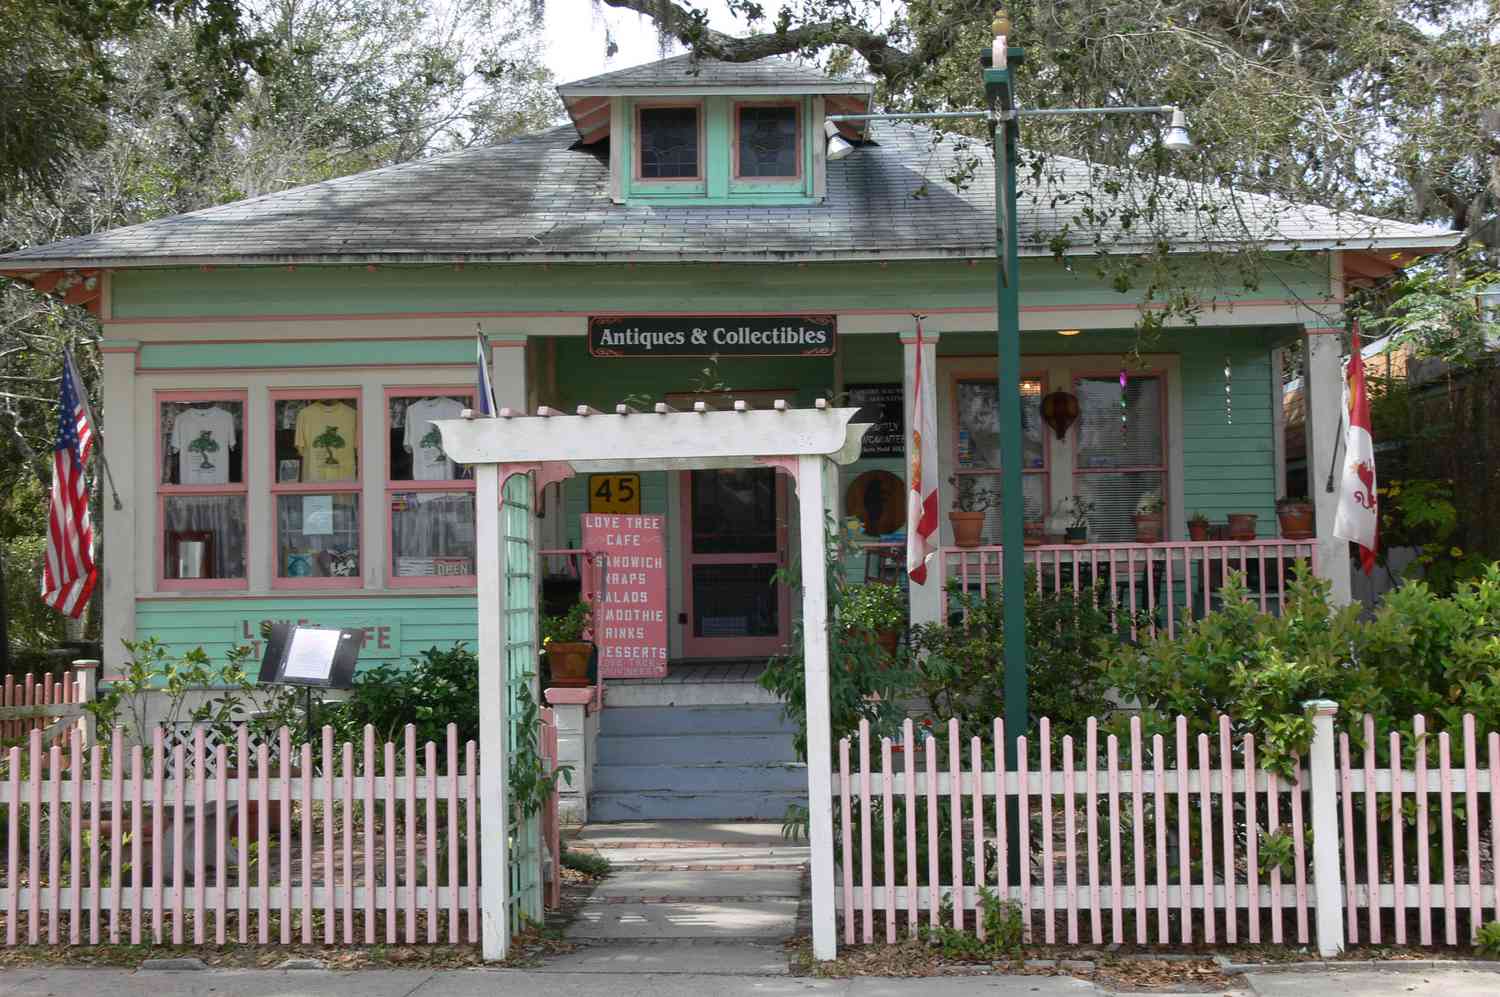 Green and pink attracts shoppers to a St. Augustine antique shop